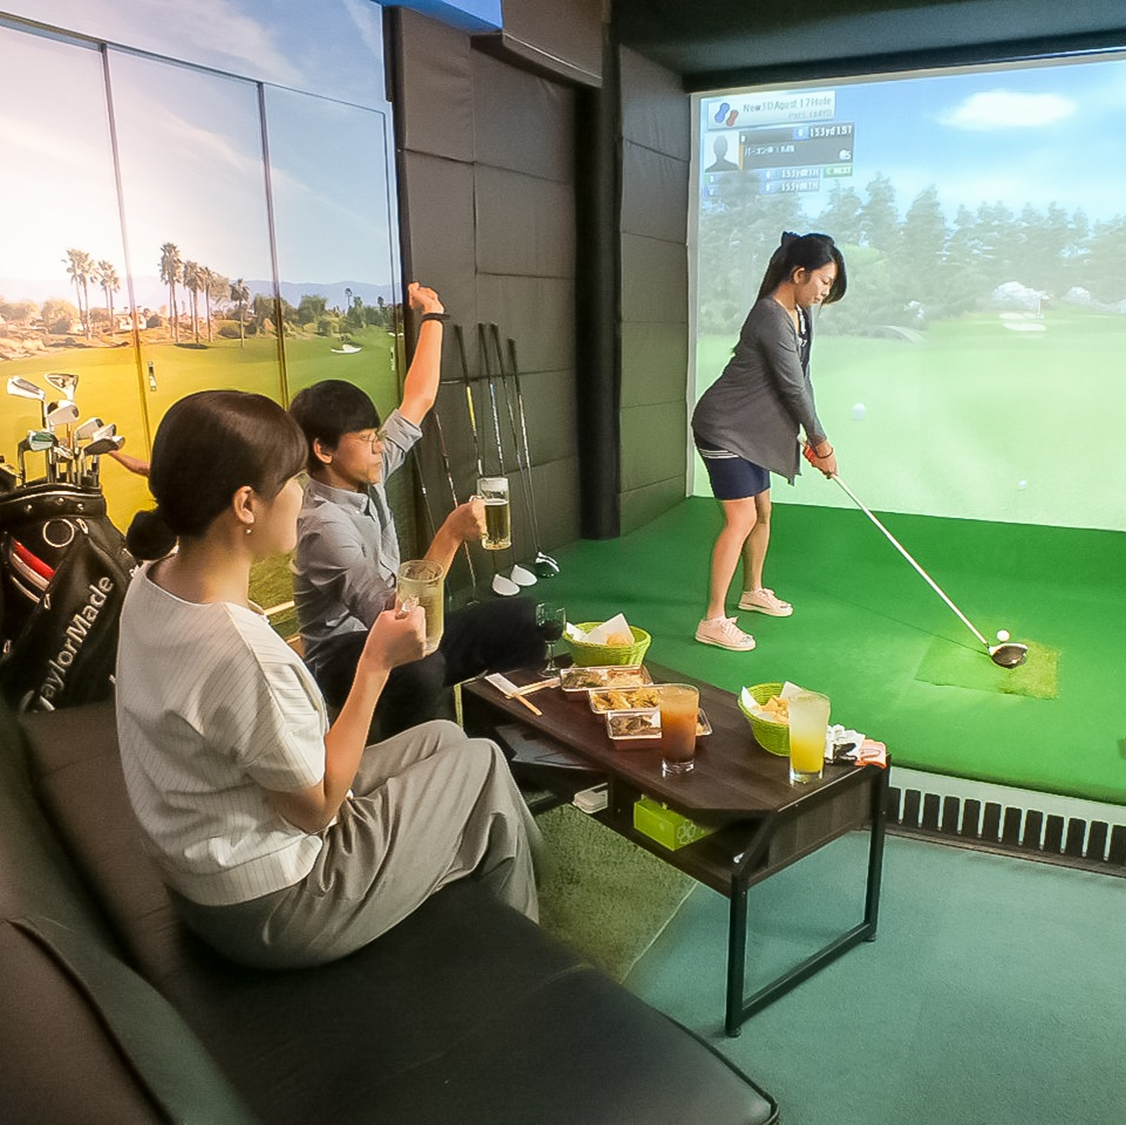 There are 4 completely private simulation golf rooms with left-hand batting.